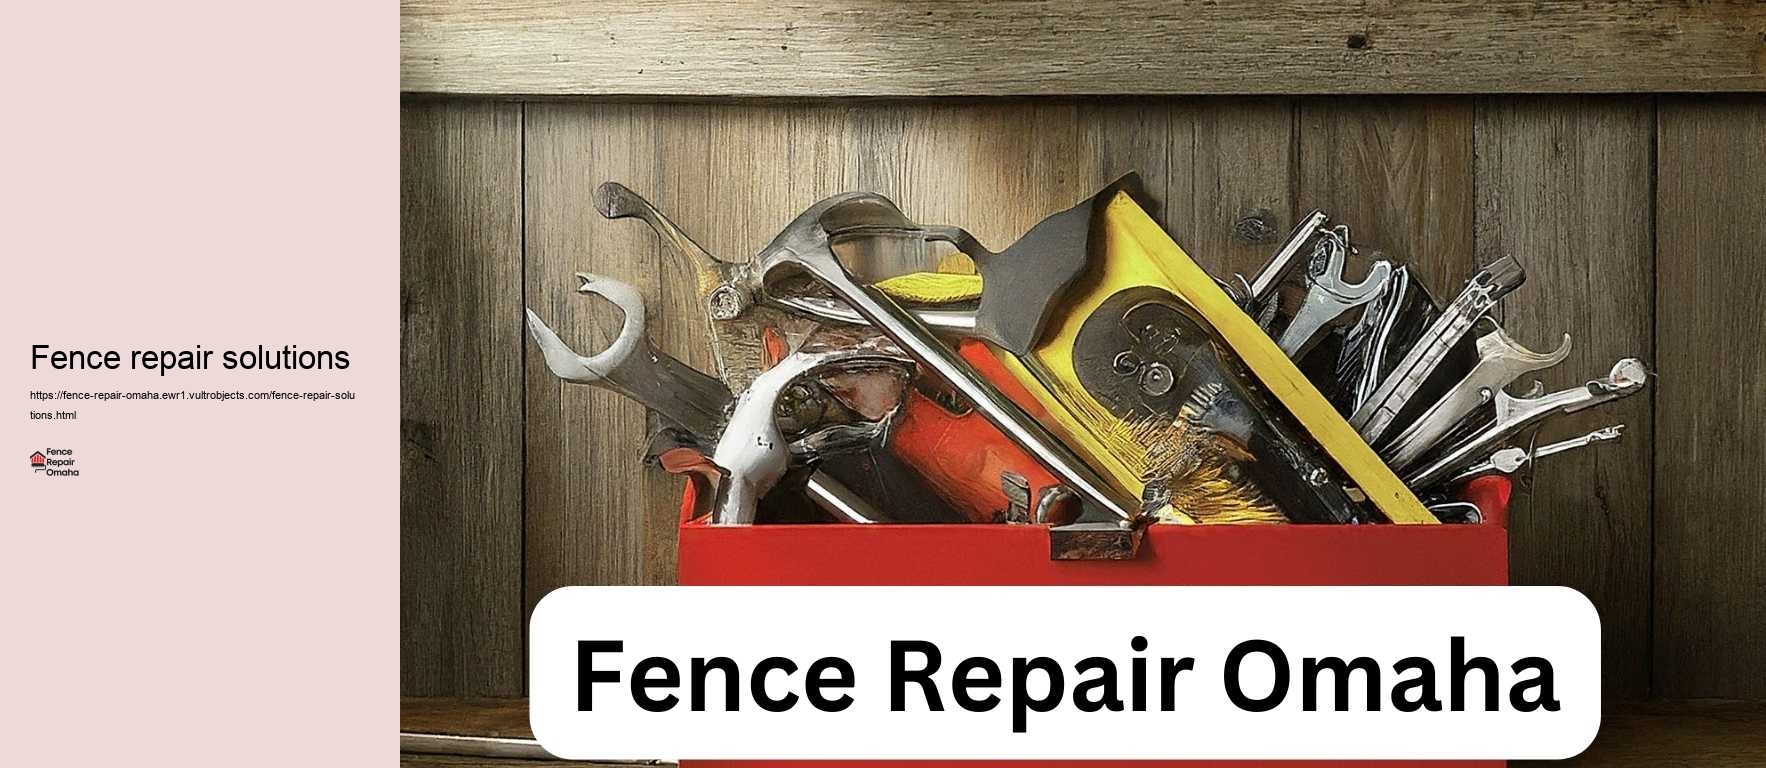 Fence repair solutions